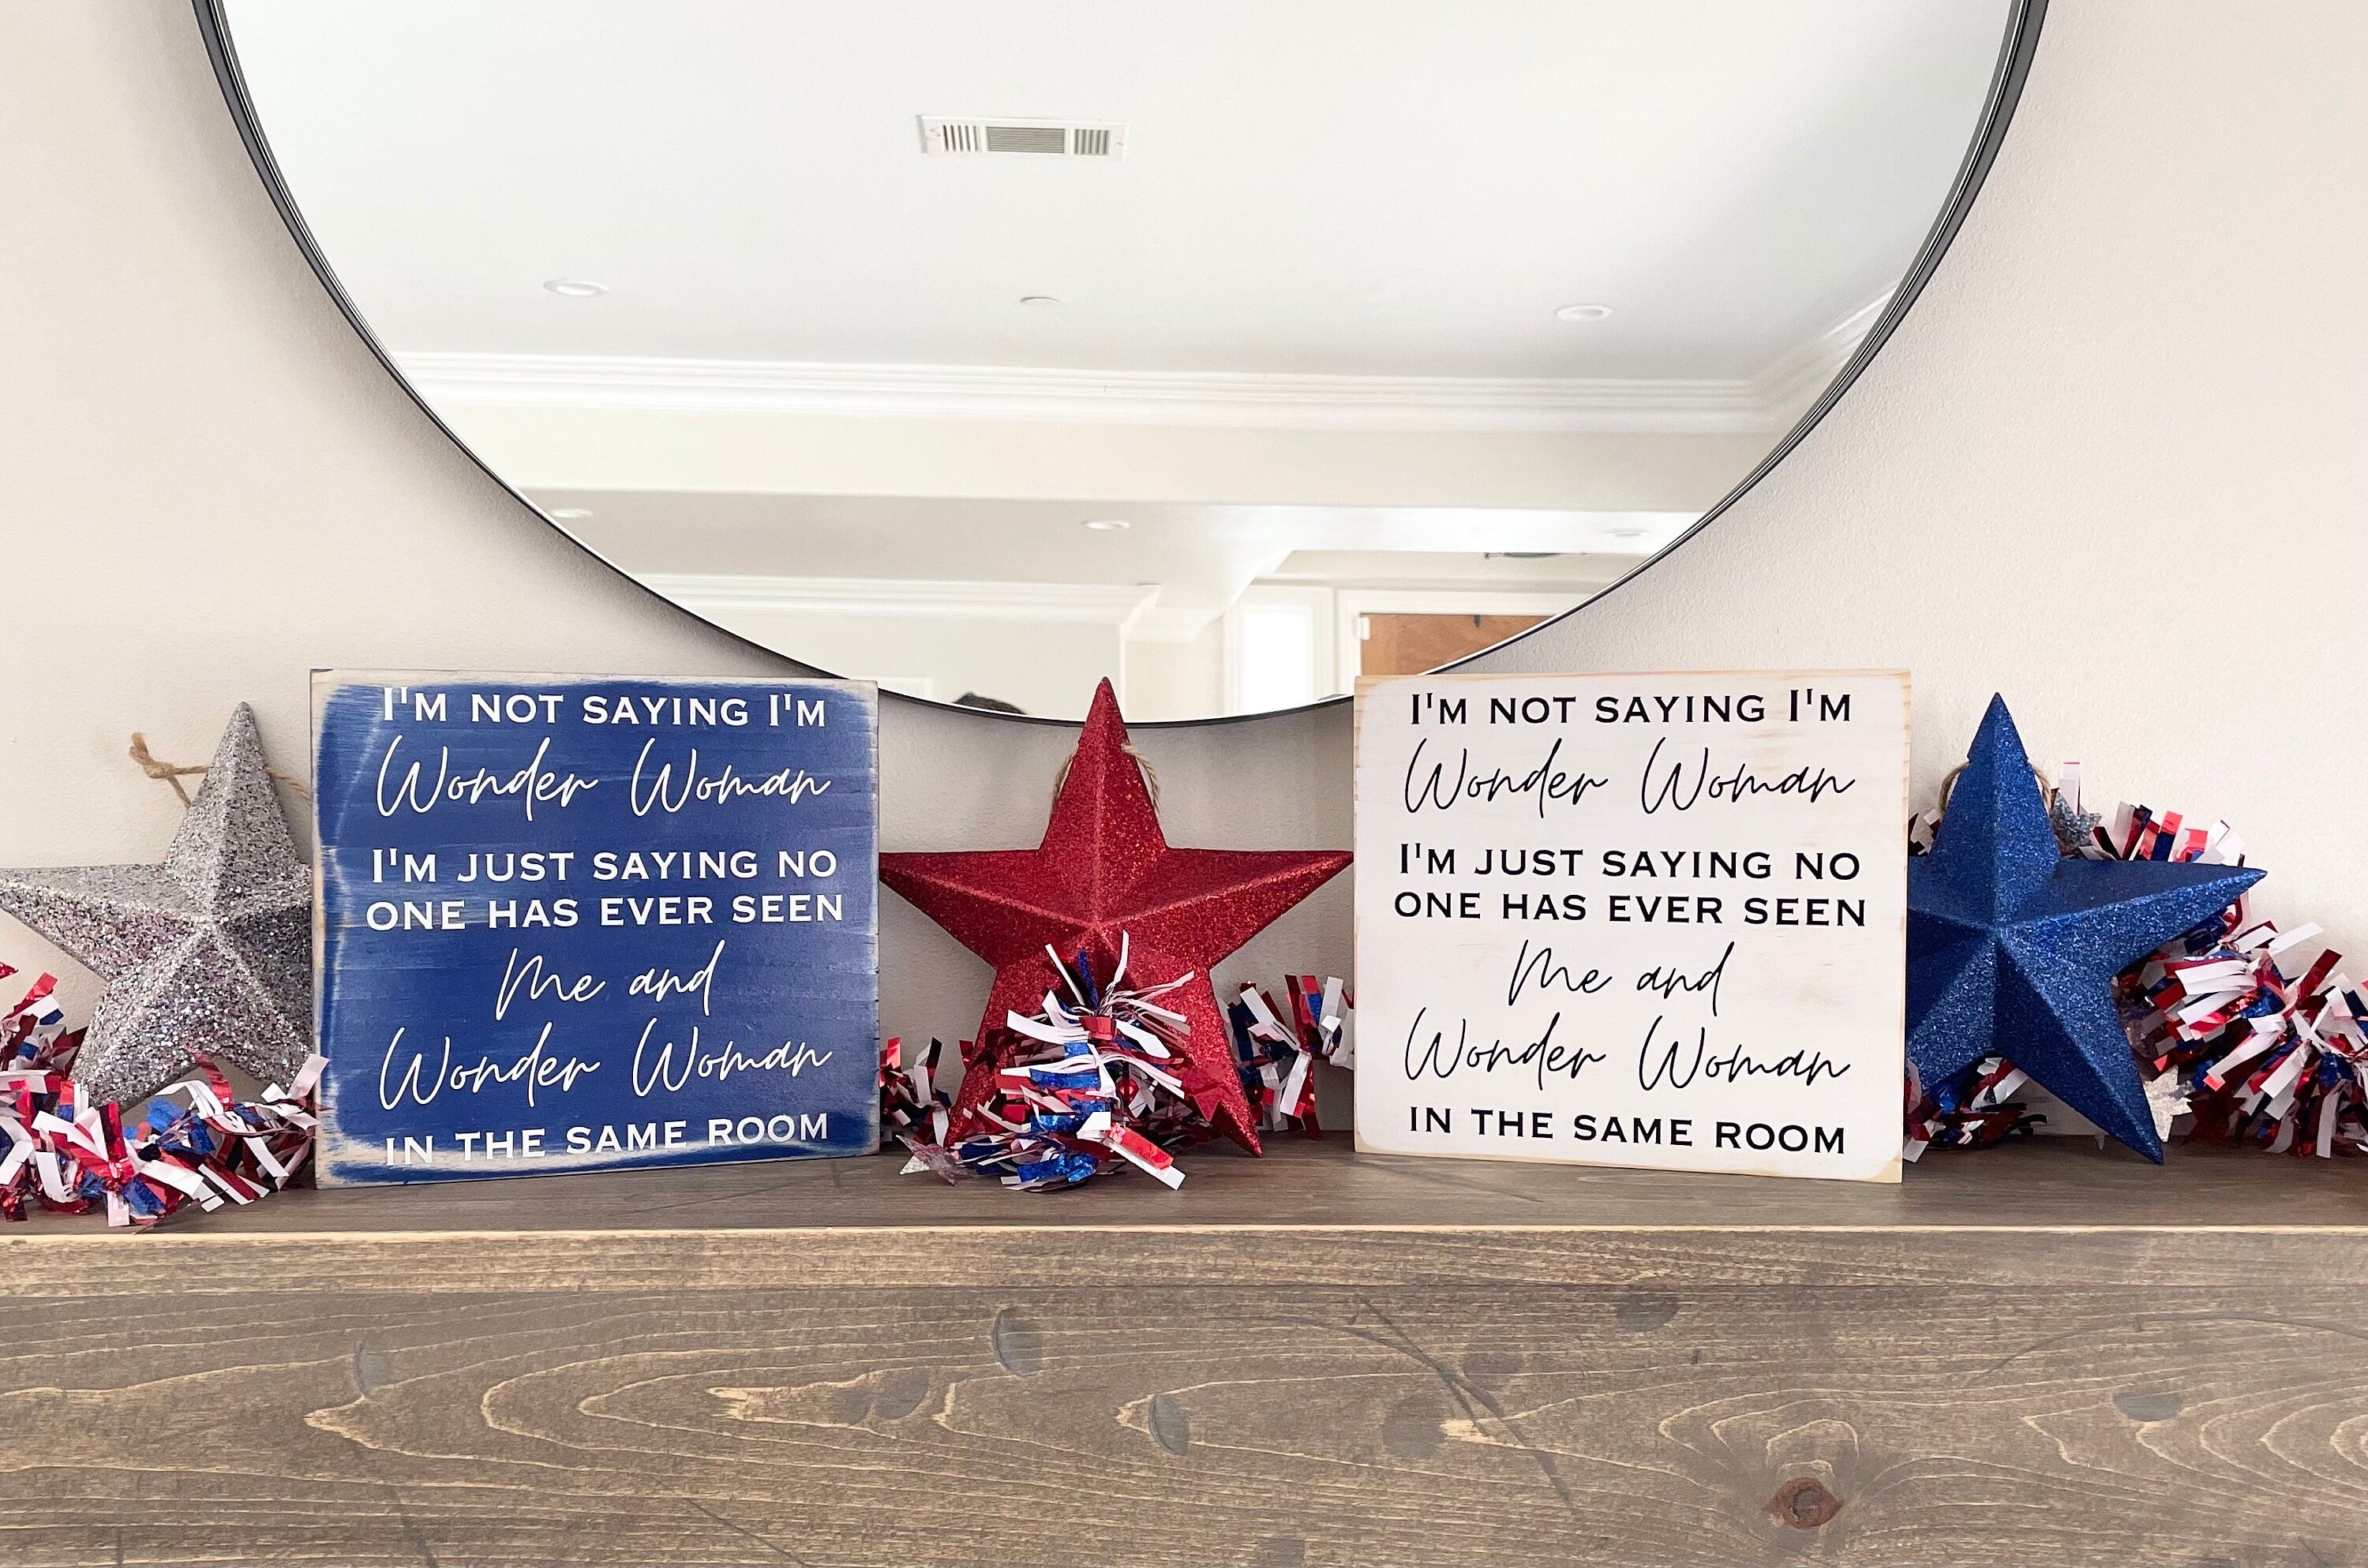 Two Wonder Woman signs sitting side by side on a mantle. The one on the left is blue, the one on the right is white